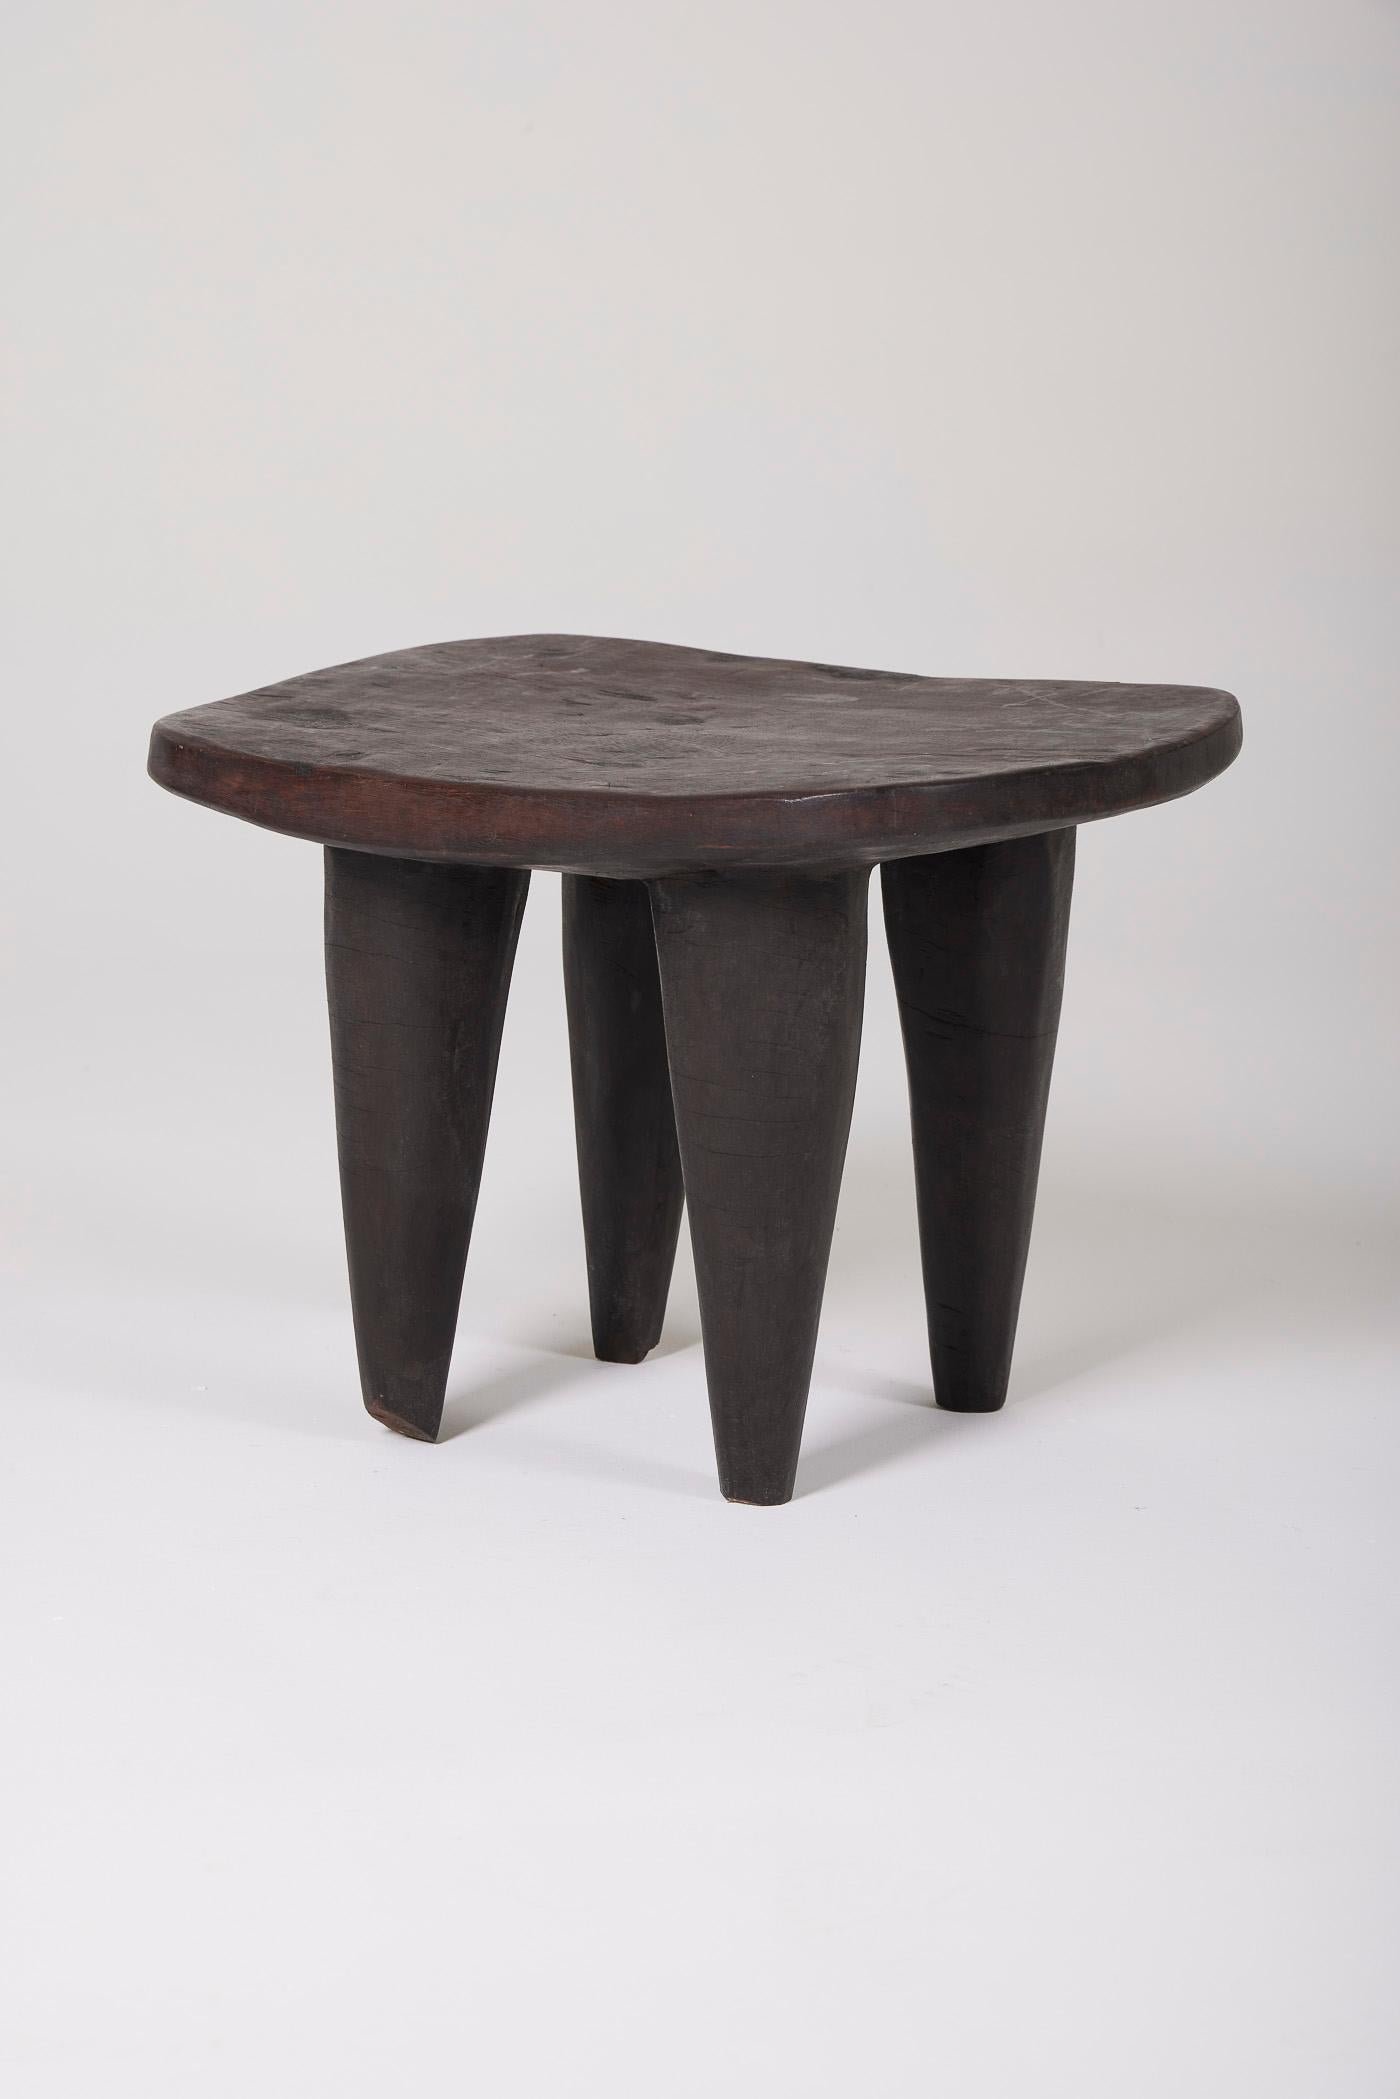 Senoufo stool, African artisanal work. In perfect condition.
LP2648